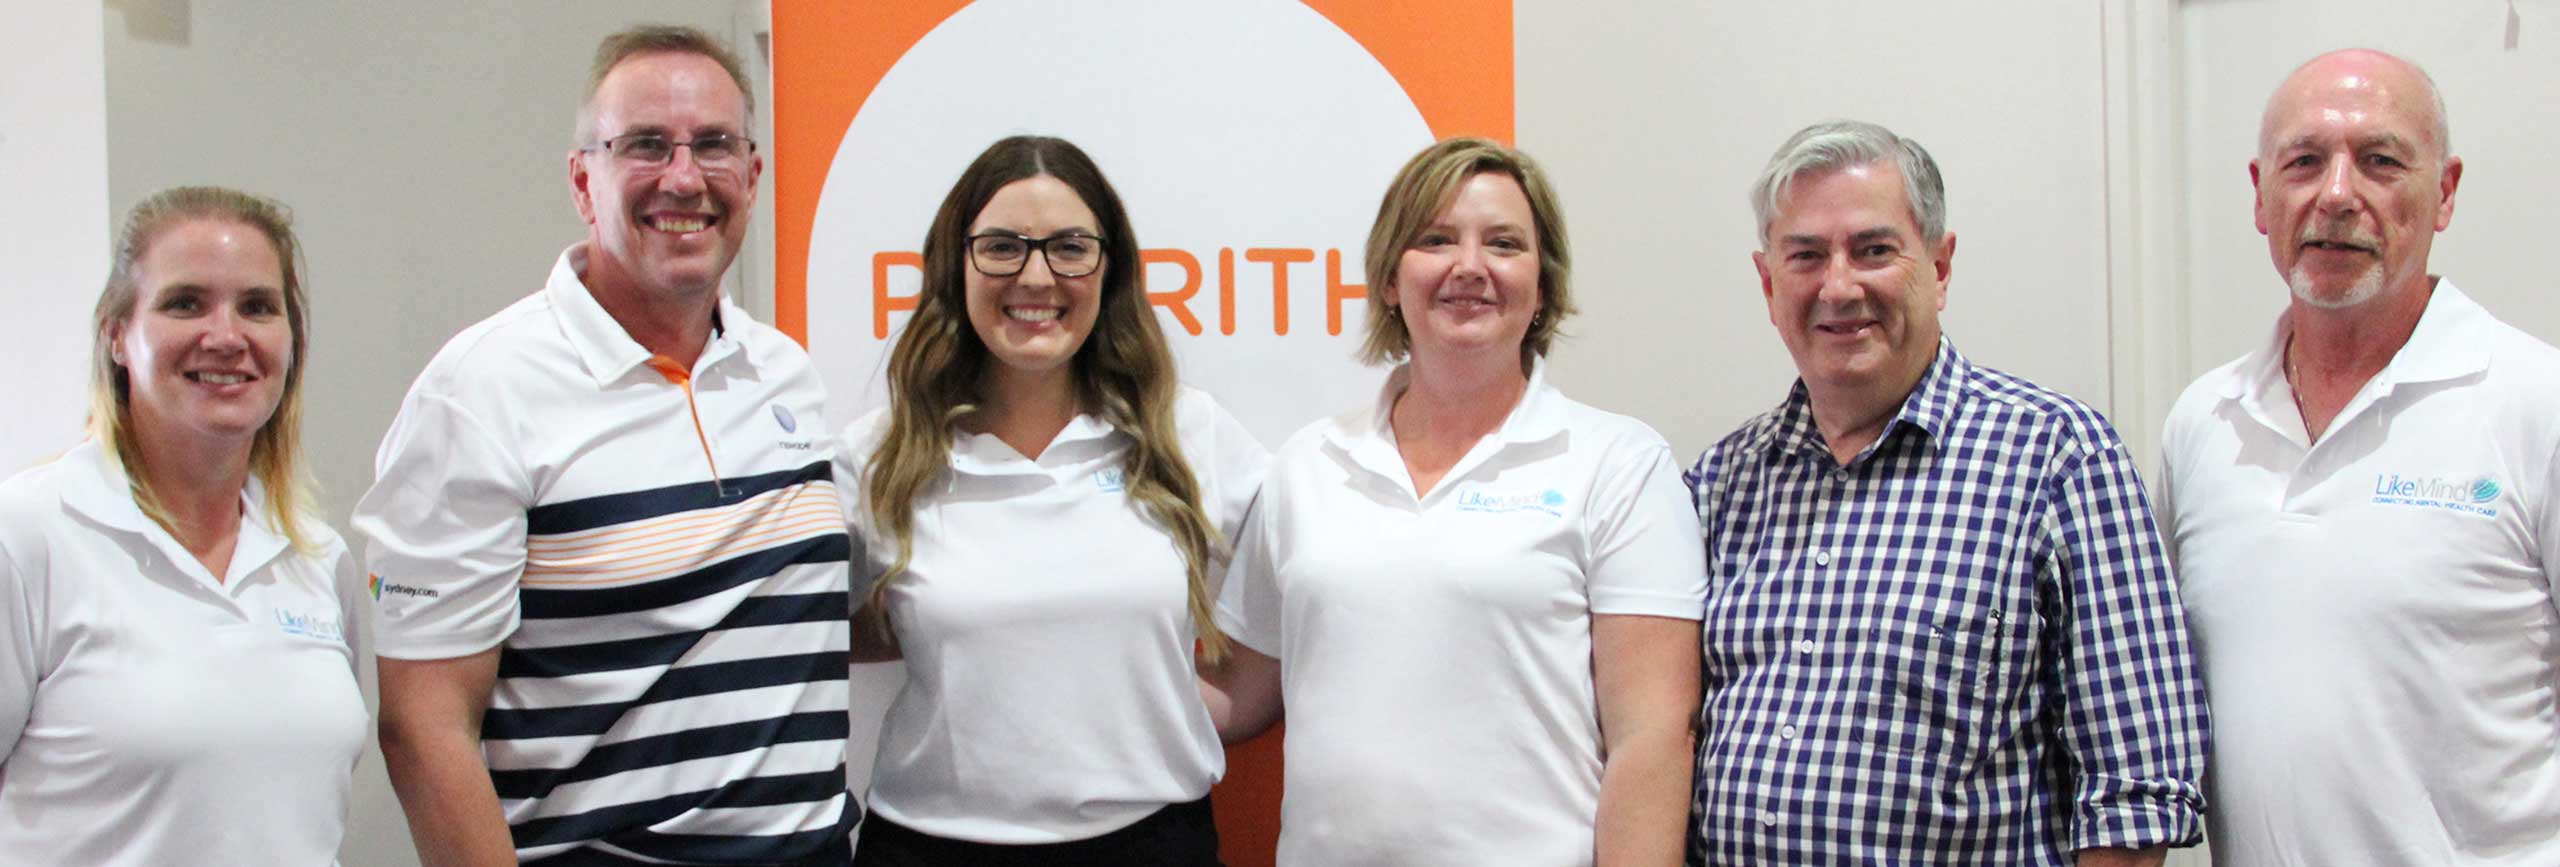 Penrith Council’s General Manager Warwick Winn (second from left) and Mayor Ross Fowler OAM (second from right) with community and health service staff from LikeMind.